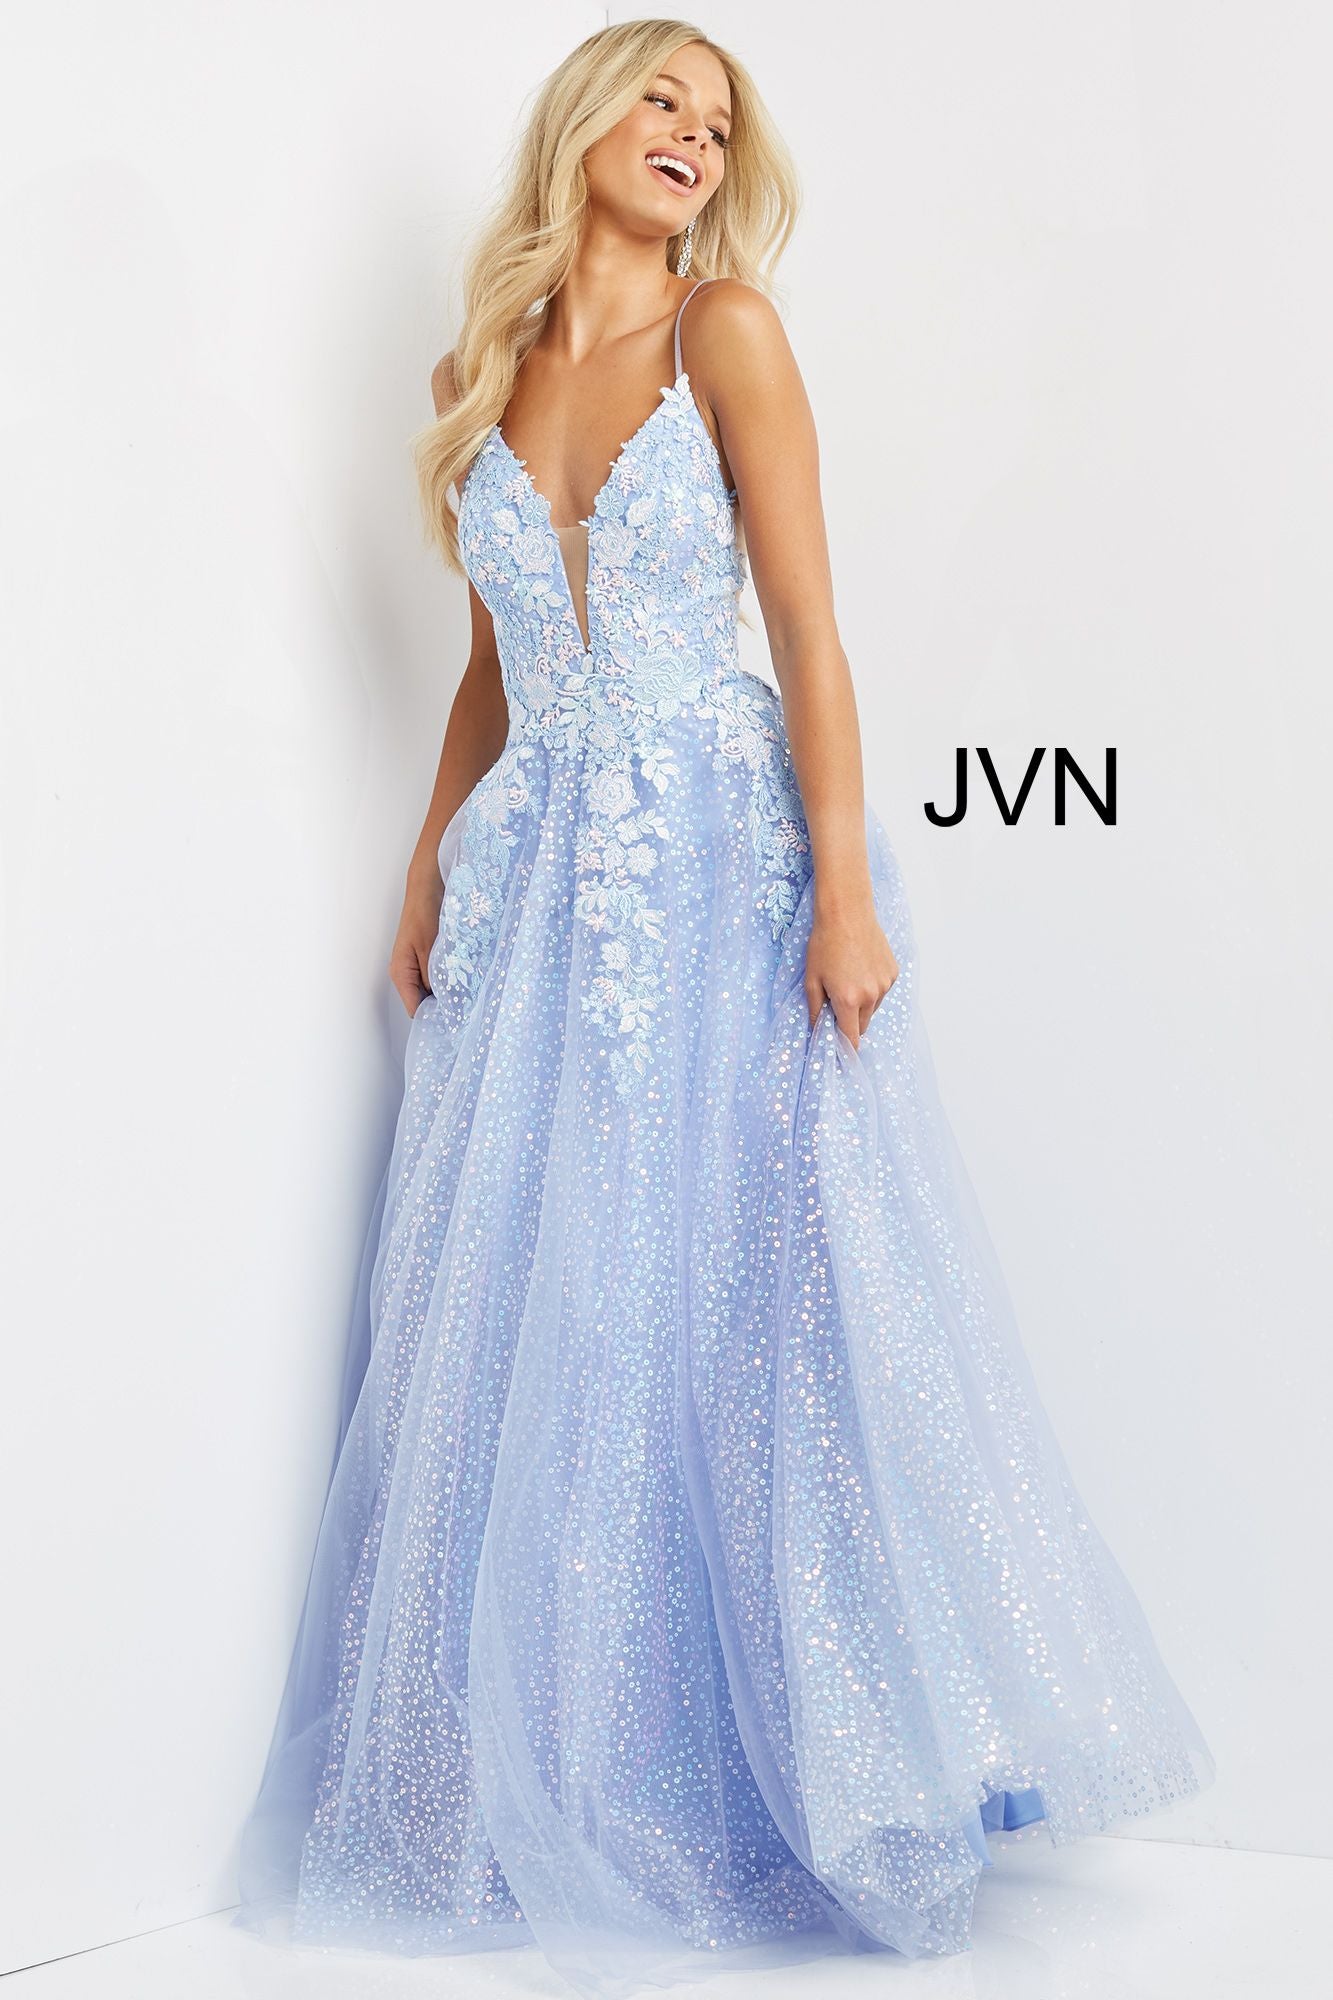 JVN07252A_FRONT-perriwinkle-blue-prom-dress-A-Line-sparkleJVN07252 Periwinkle Prom Dress.  Do you love flowers and periwinkle?  Then this prom dress is for you.  It is an A line dress with sequin underlay long skirt.  The bodice has a low v neckline with sheer courtesy panel.  The bodice is covered in floral appliques that stream down the dress.  Available color:  Periwinkle  Available sizes:  00-24 